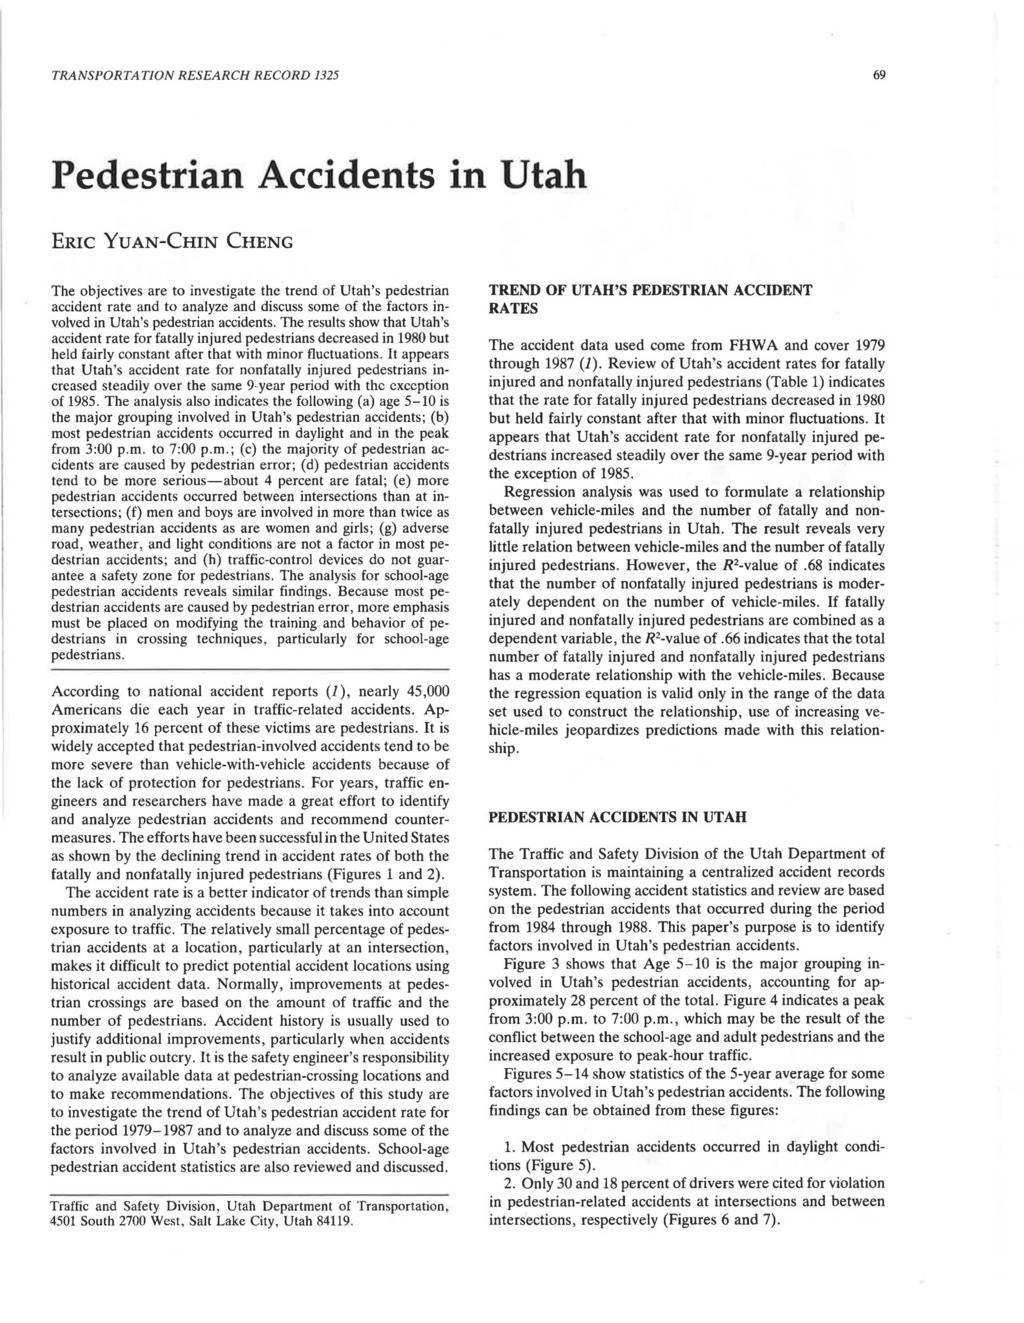 TRANSPORTATION RESEARCH RECORD 1325 69 Pedestrian Accidents in Utah ERIC YUAN-CHIN CHENG The objectives are to investigate the trend of Utah's pedestrian accident rate and to analyze and discuss some